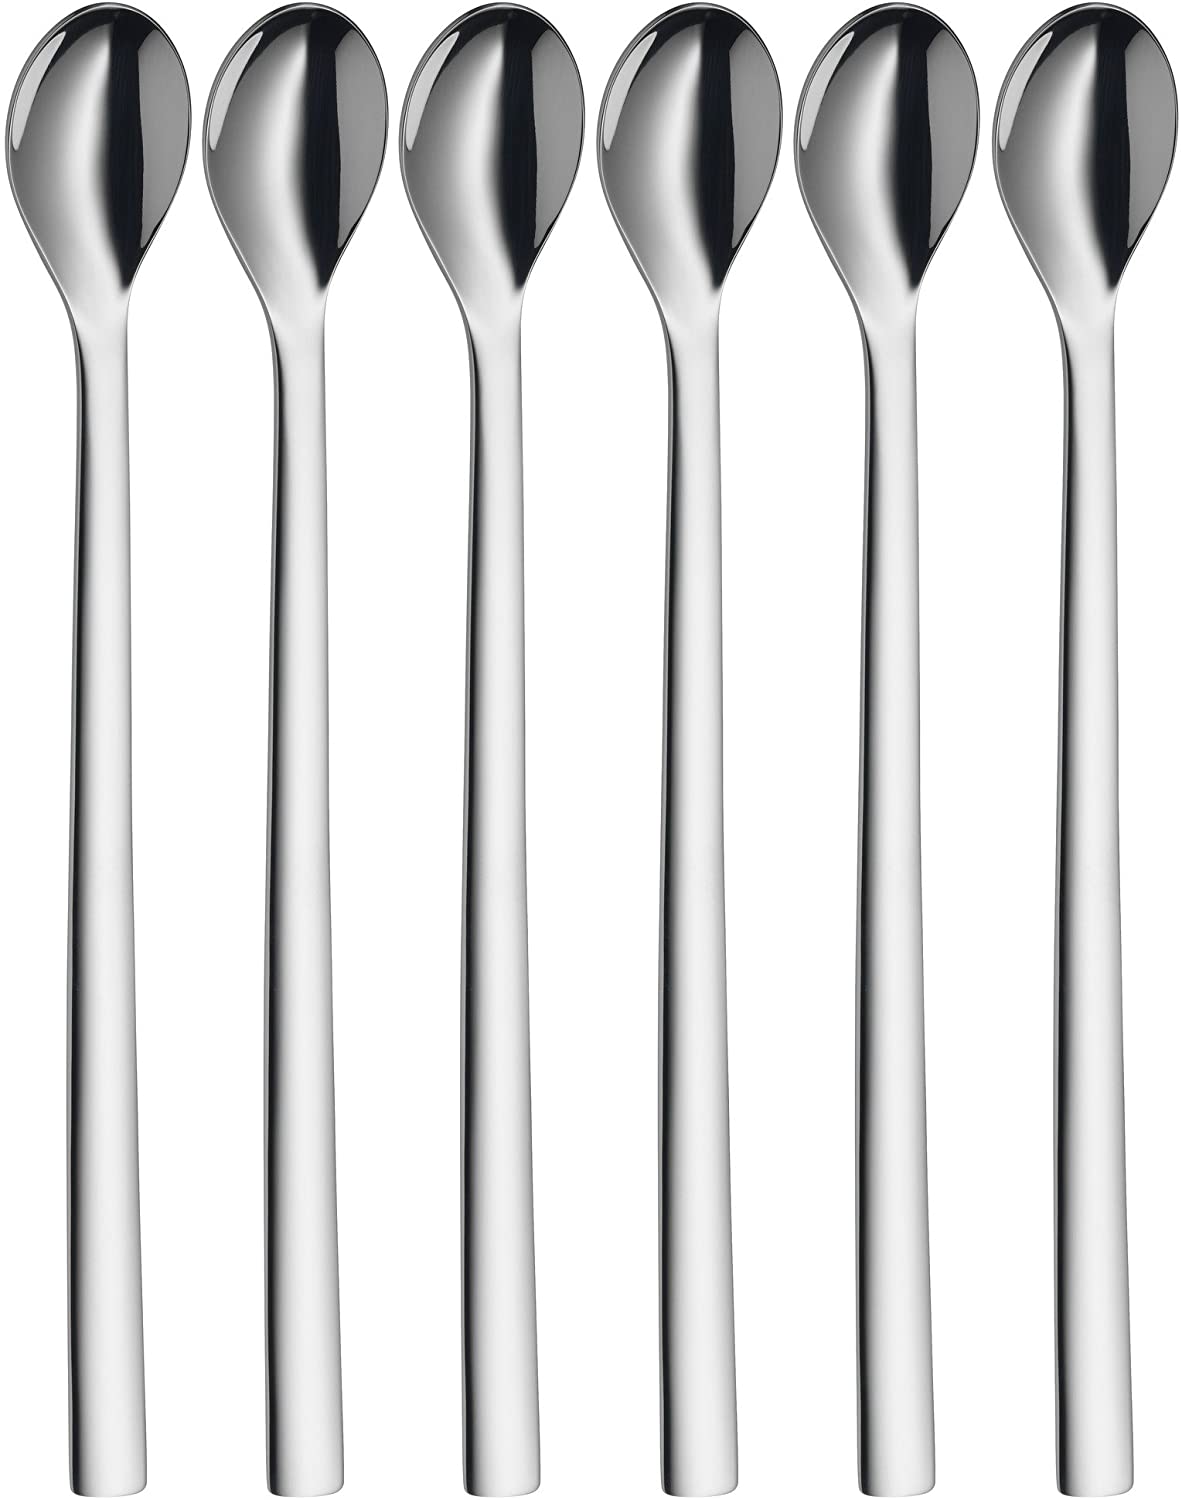 WMF Nuova 1291406046 Long Cocktail Spoon Set 6 Pieces